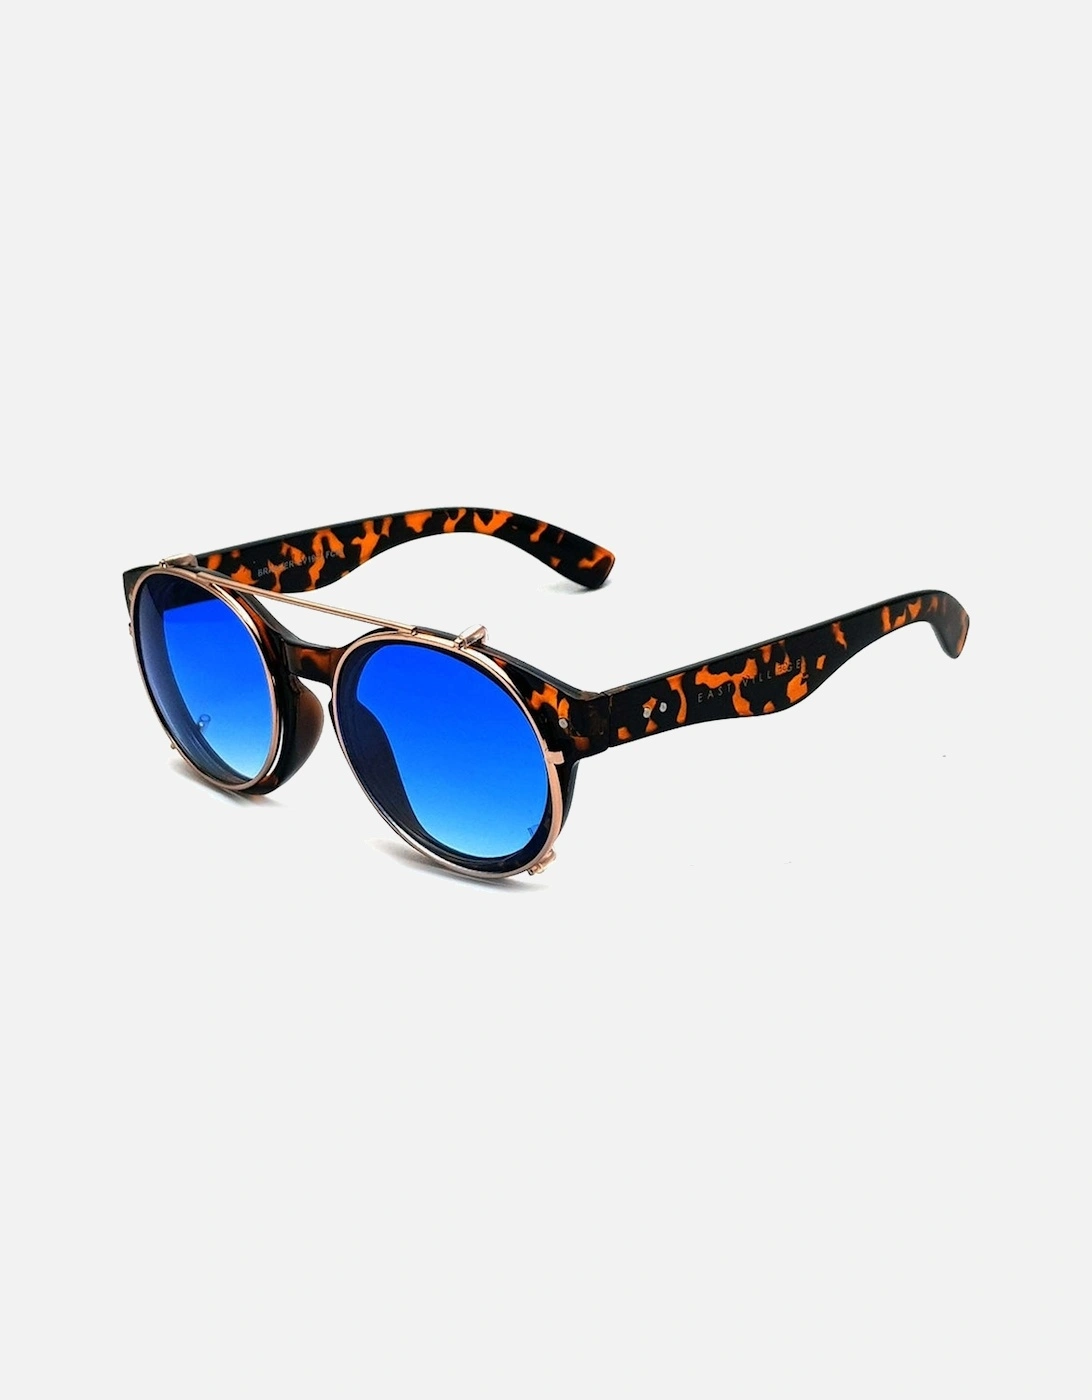 'Brawler' Round Sunglasses Tortoiseshell And Metal With Blue Lens, 2 of 1